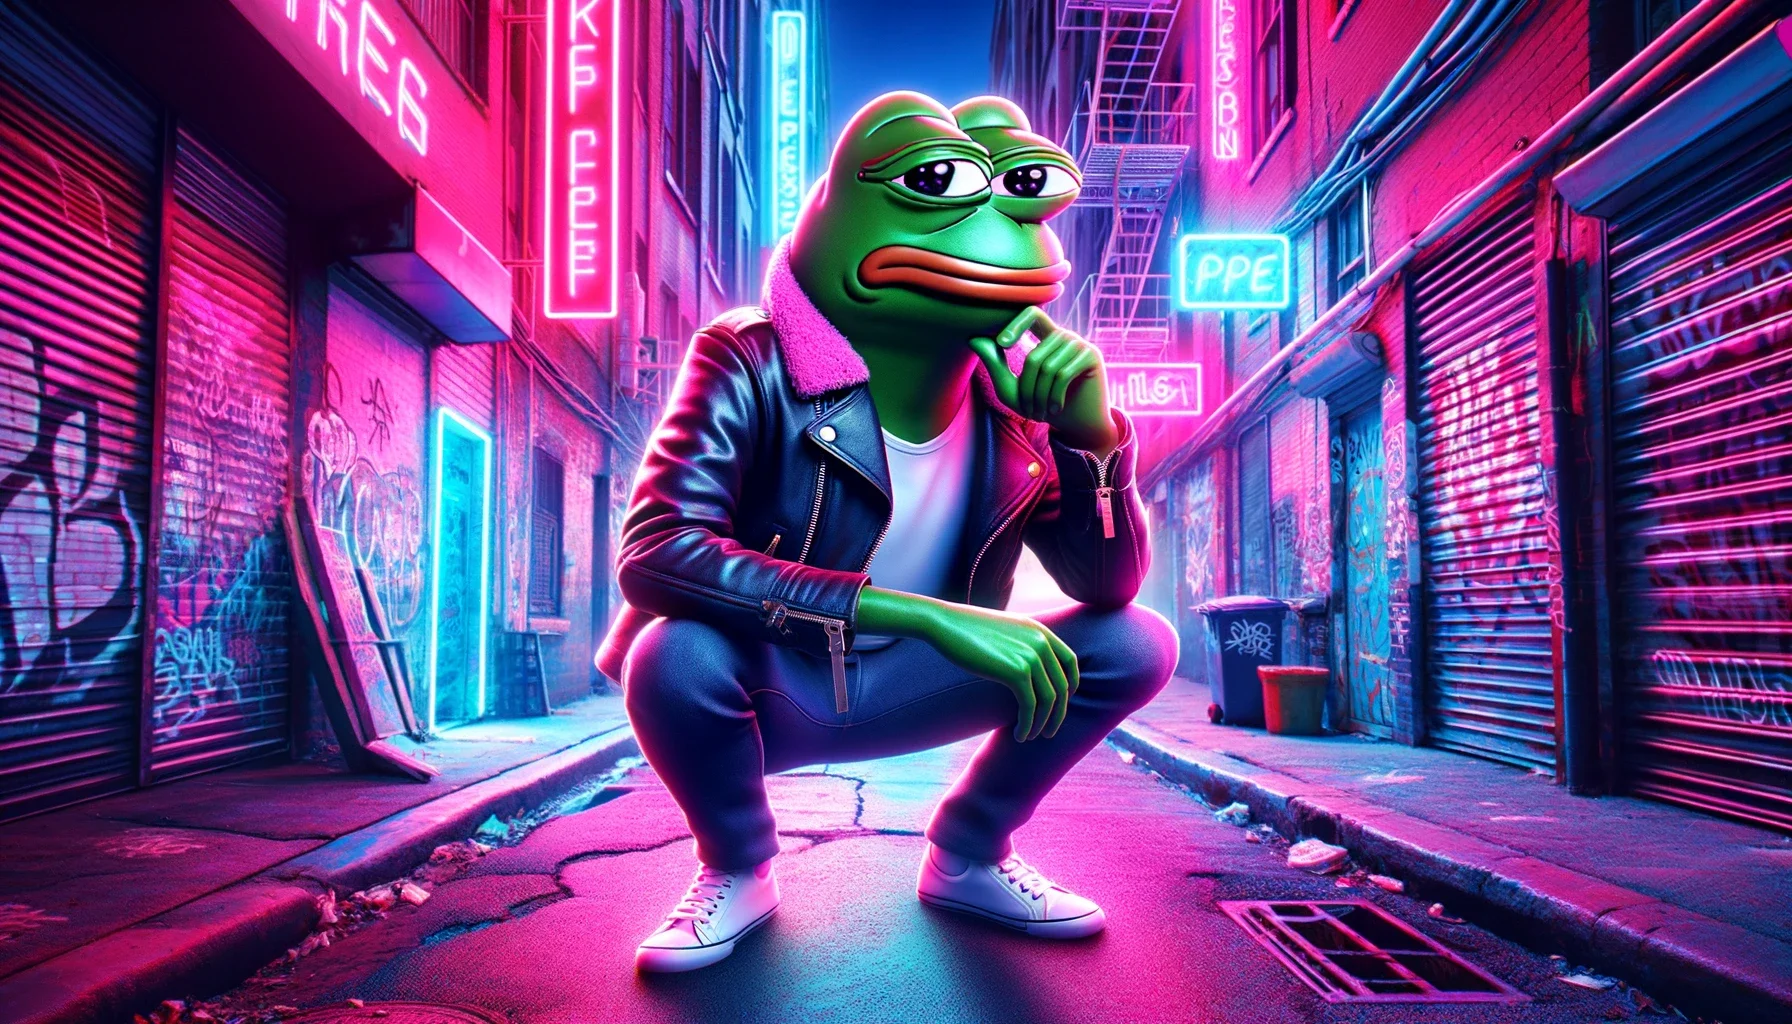 Dall·e 2024 03 07 16.16.50   create an image featuring an anthropomorphized frog in a contemplative pose, reminiscent of the 'pepe the frog' meme, standing in a cool stance, dress